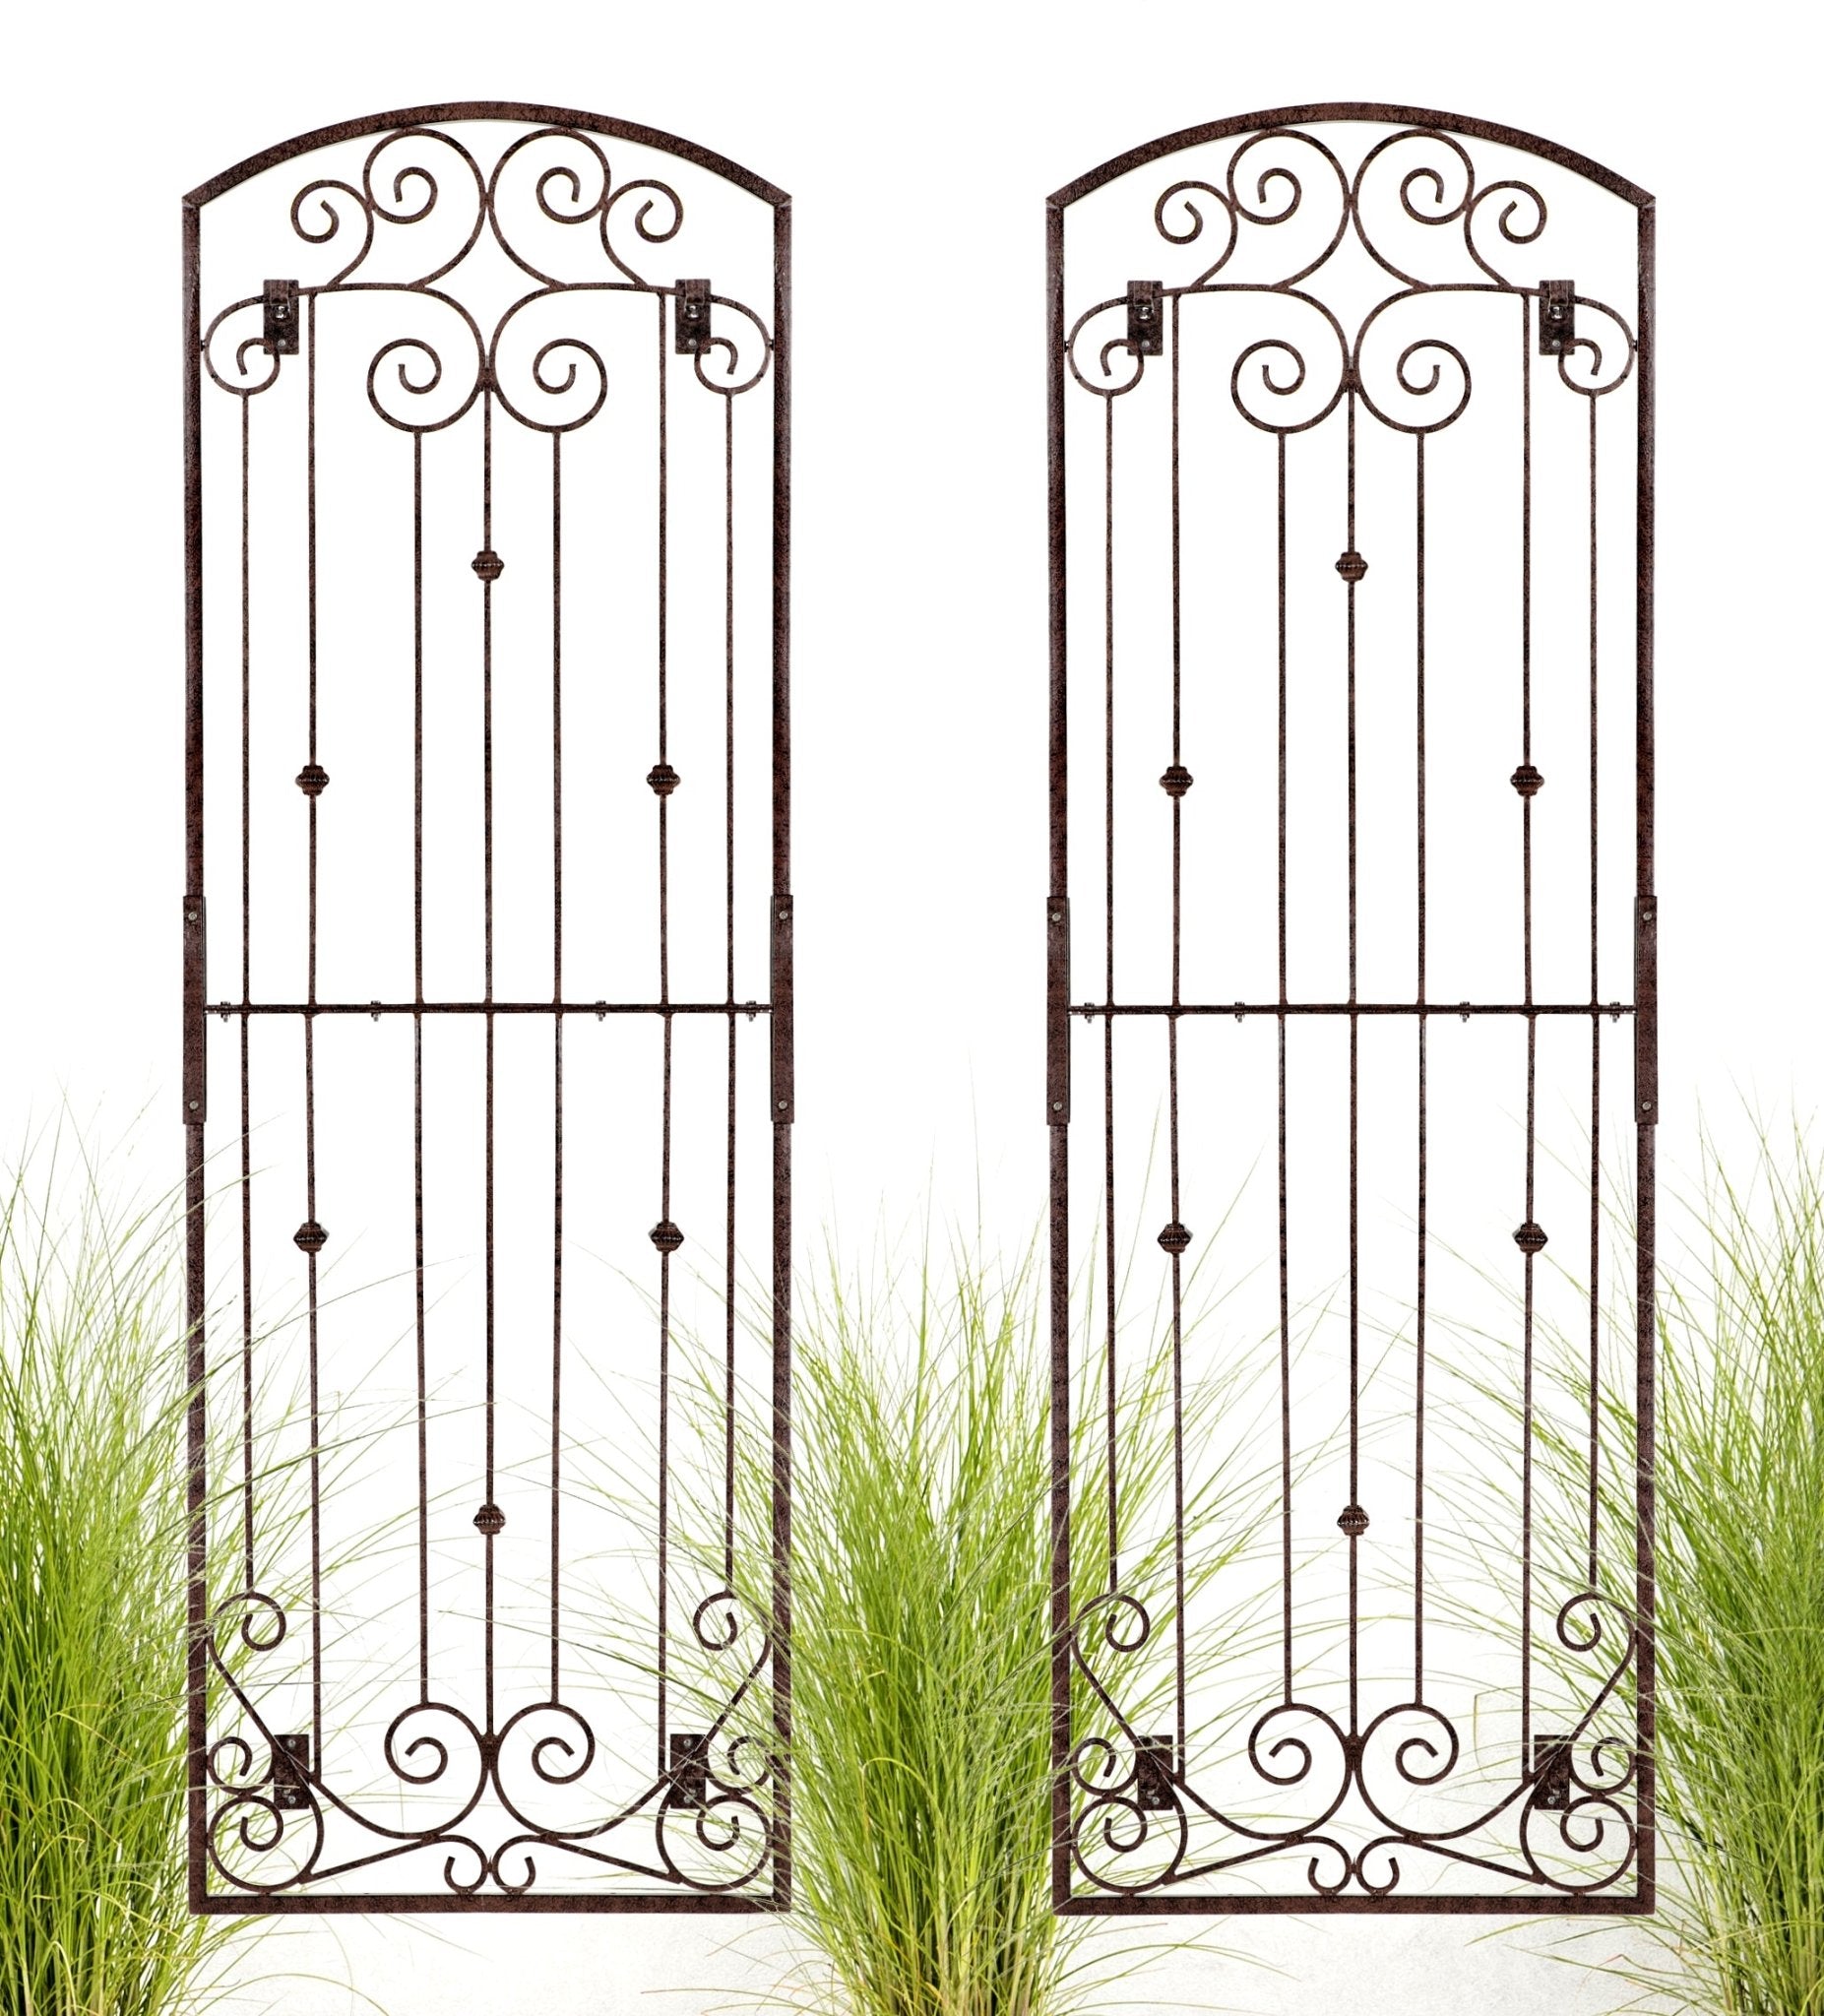 H Potter Set of 2 8 Foot Wrought Iron Garden Trellis Metal Wall Screen with Wall Mounting Brackets